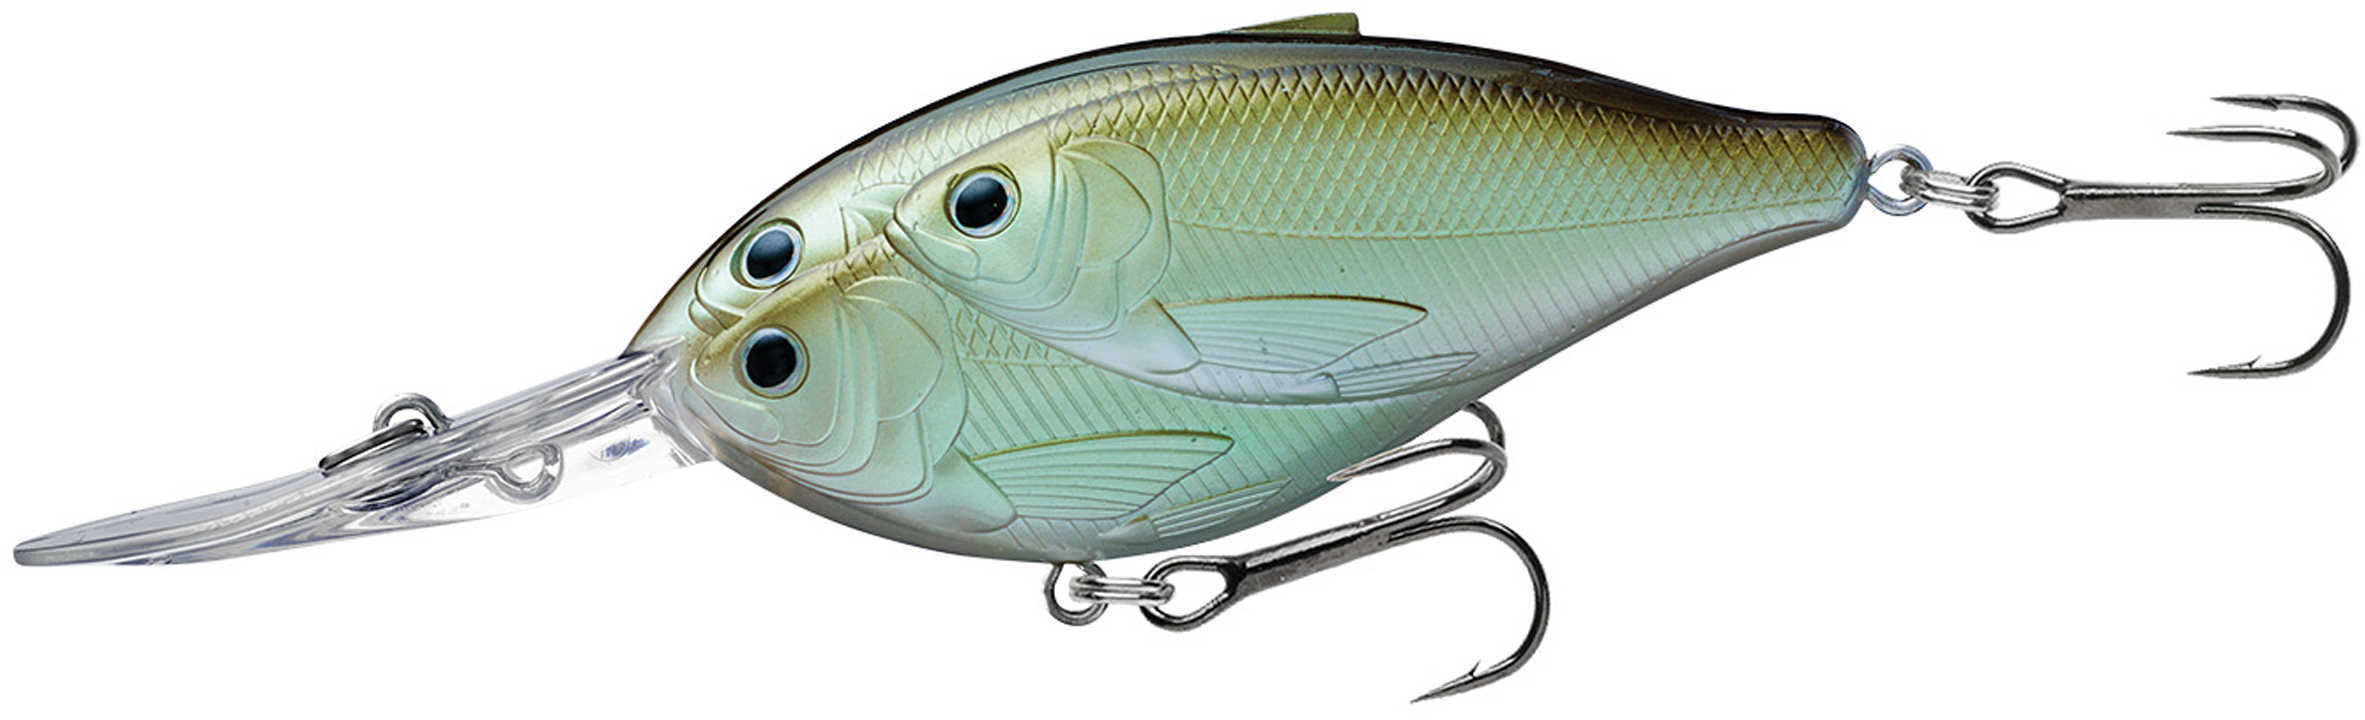 LIVETARGET Lures / Koppers Fishing and Tackle Corp Threadfin Shad Crankbait 2 3/4" Number 4 Hook Size 12 Depth Green/Ghost Md: TDD